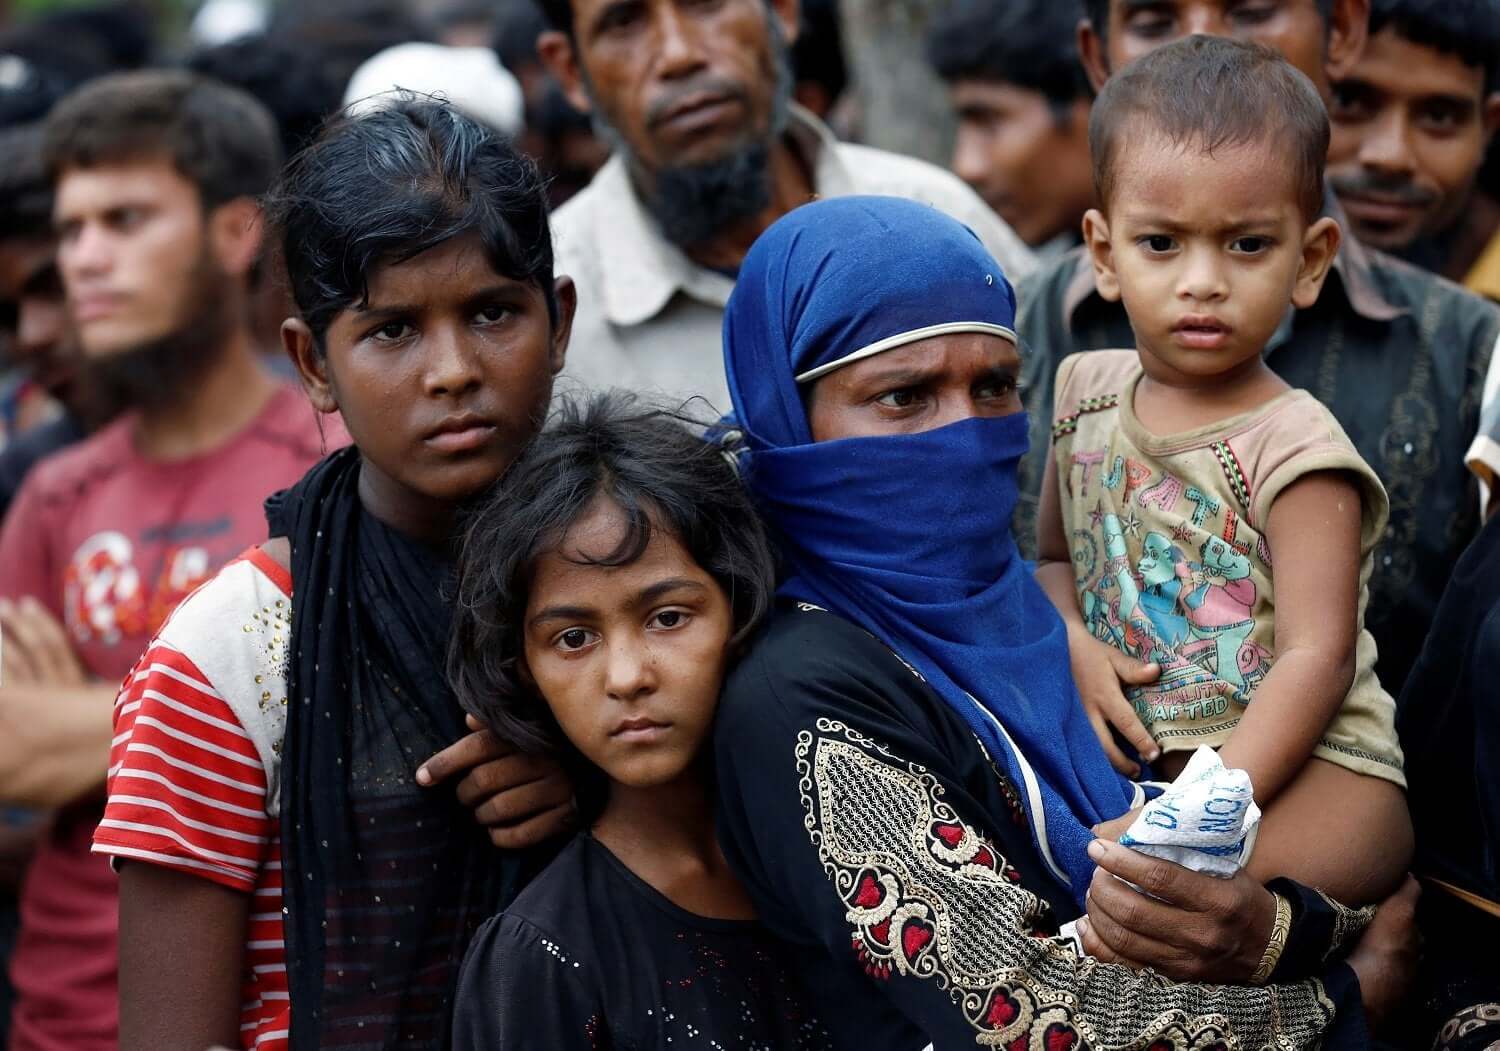 A European Solution for Asylum-Seekers in South Asia?